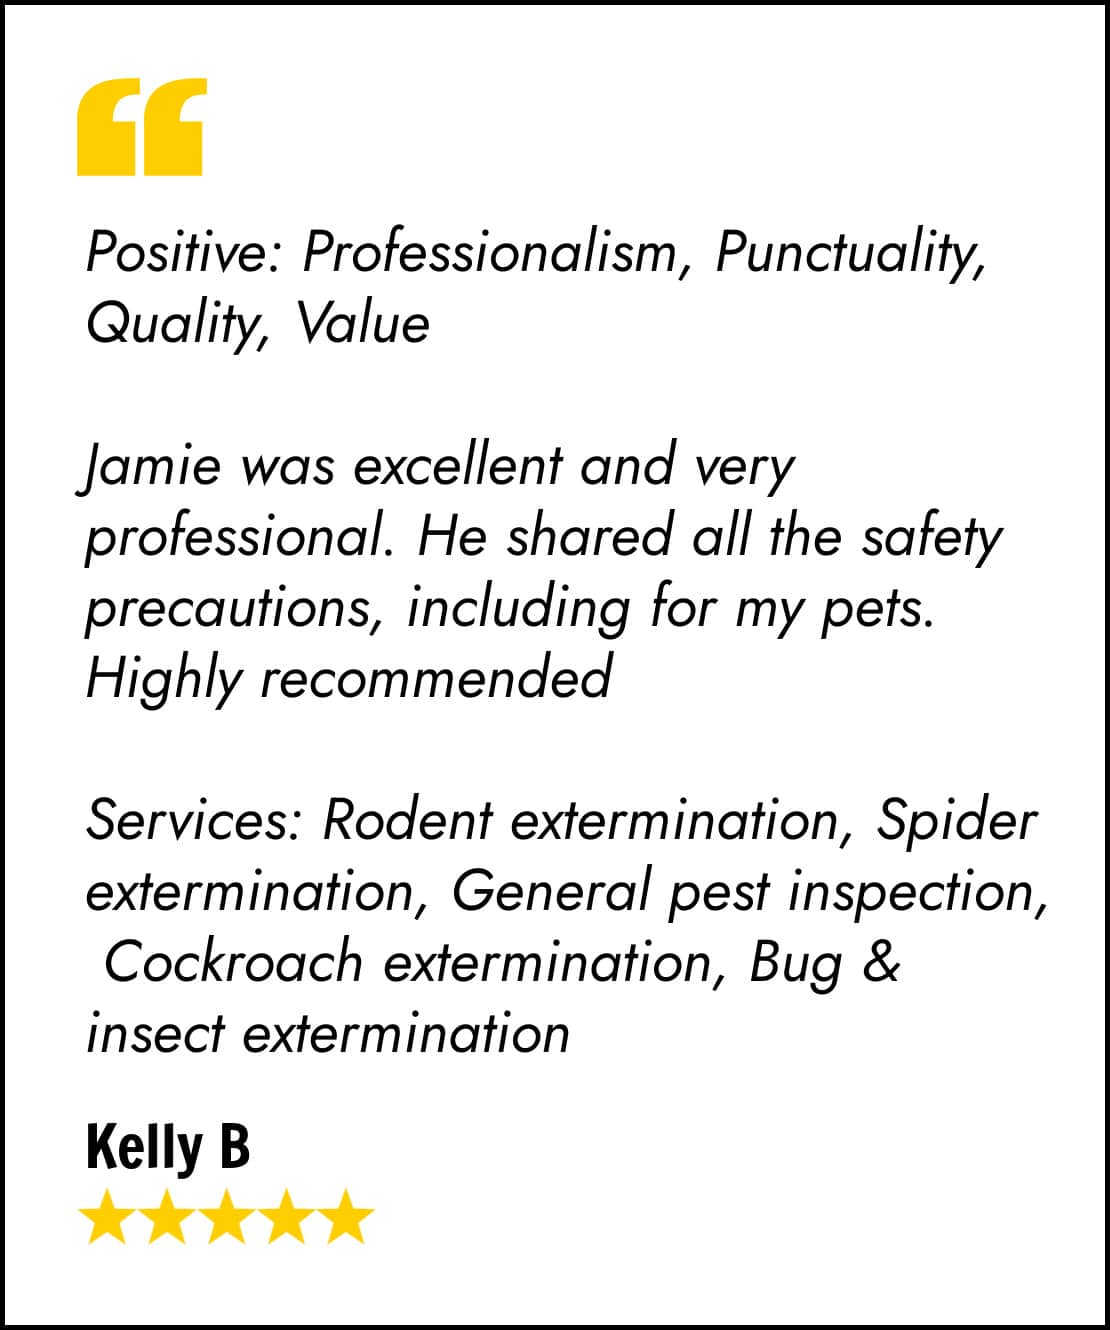 5 star Rat and Mice testimonial by Kelly B